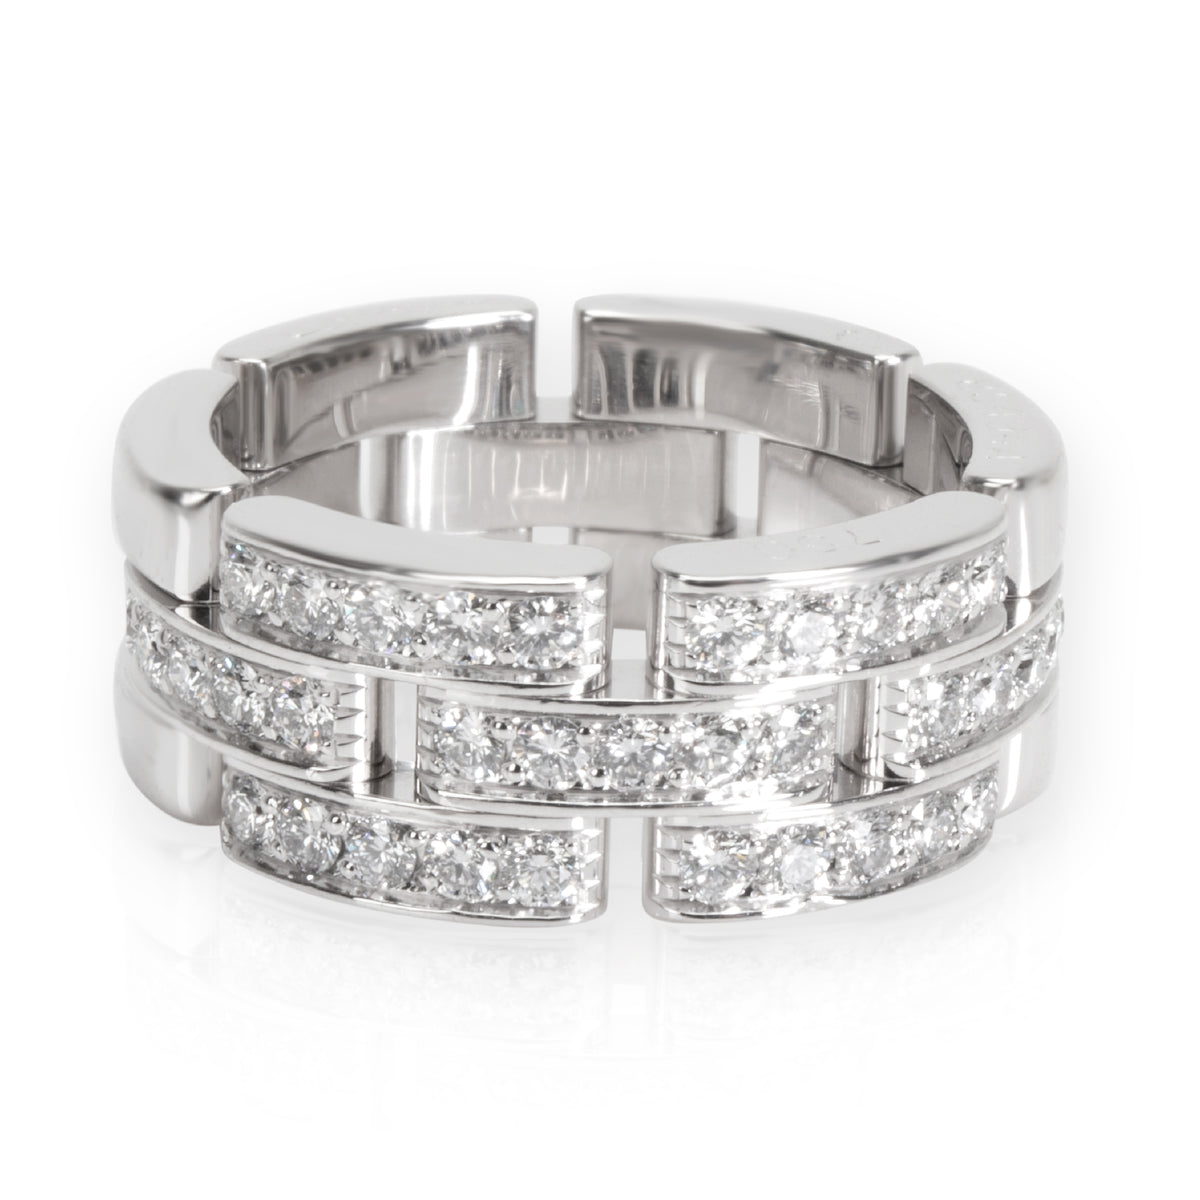 Cartier Maillon Panthere Diamond Band in 18K White Gold 0.5 CTW